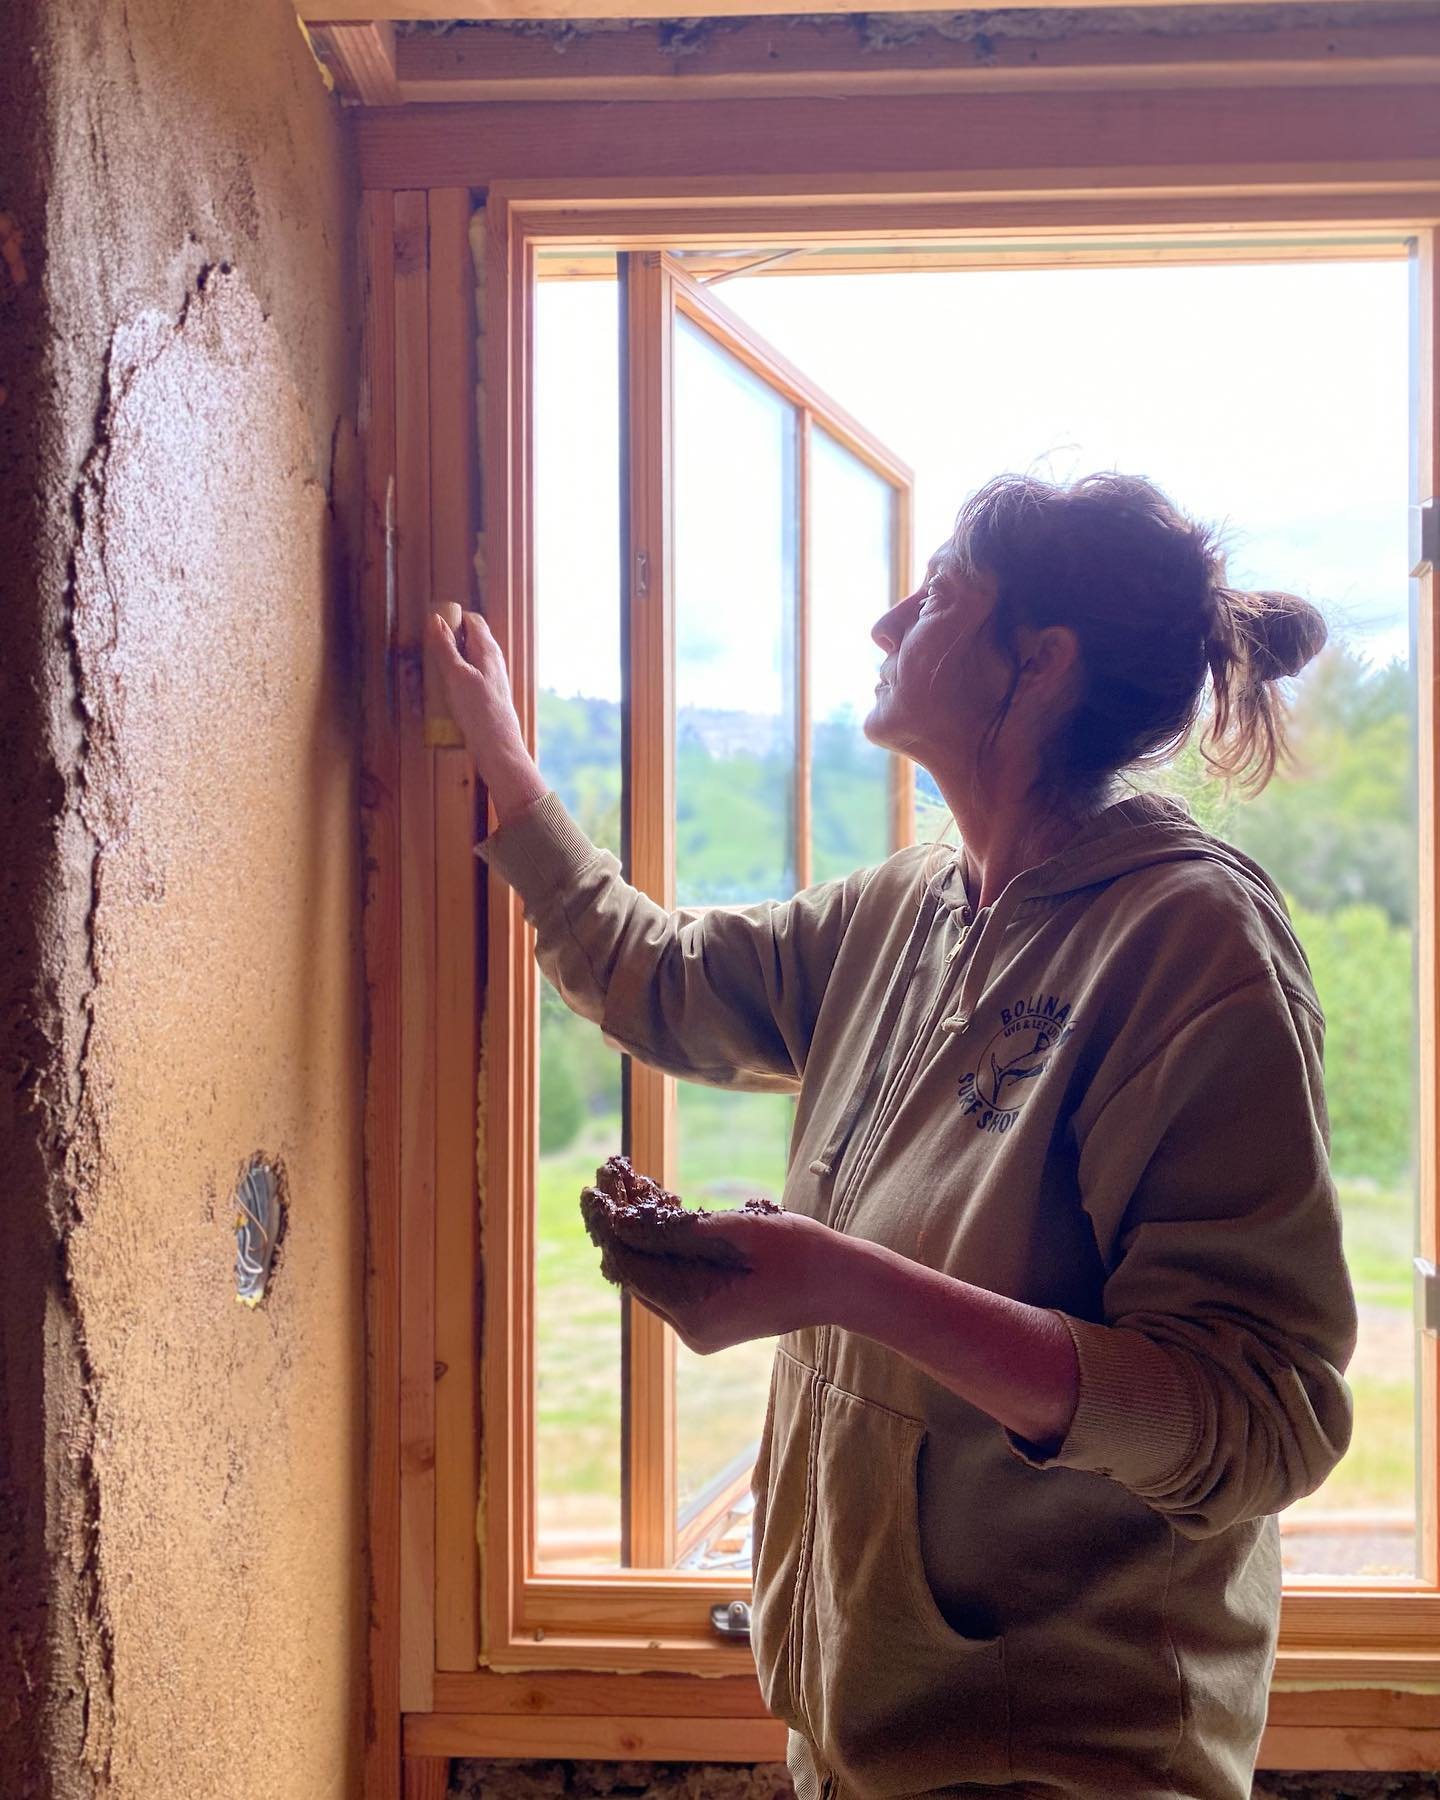 A few snapshots of a fun project we have been working on in Booneville, Ca. Grateful our work takes us to such beautiful places. Just finishing up the brown coat, preparing for the finish coat. The native clay is a beautiful orange, and mixed with a 